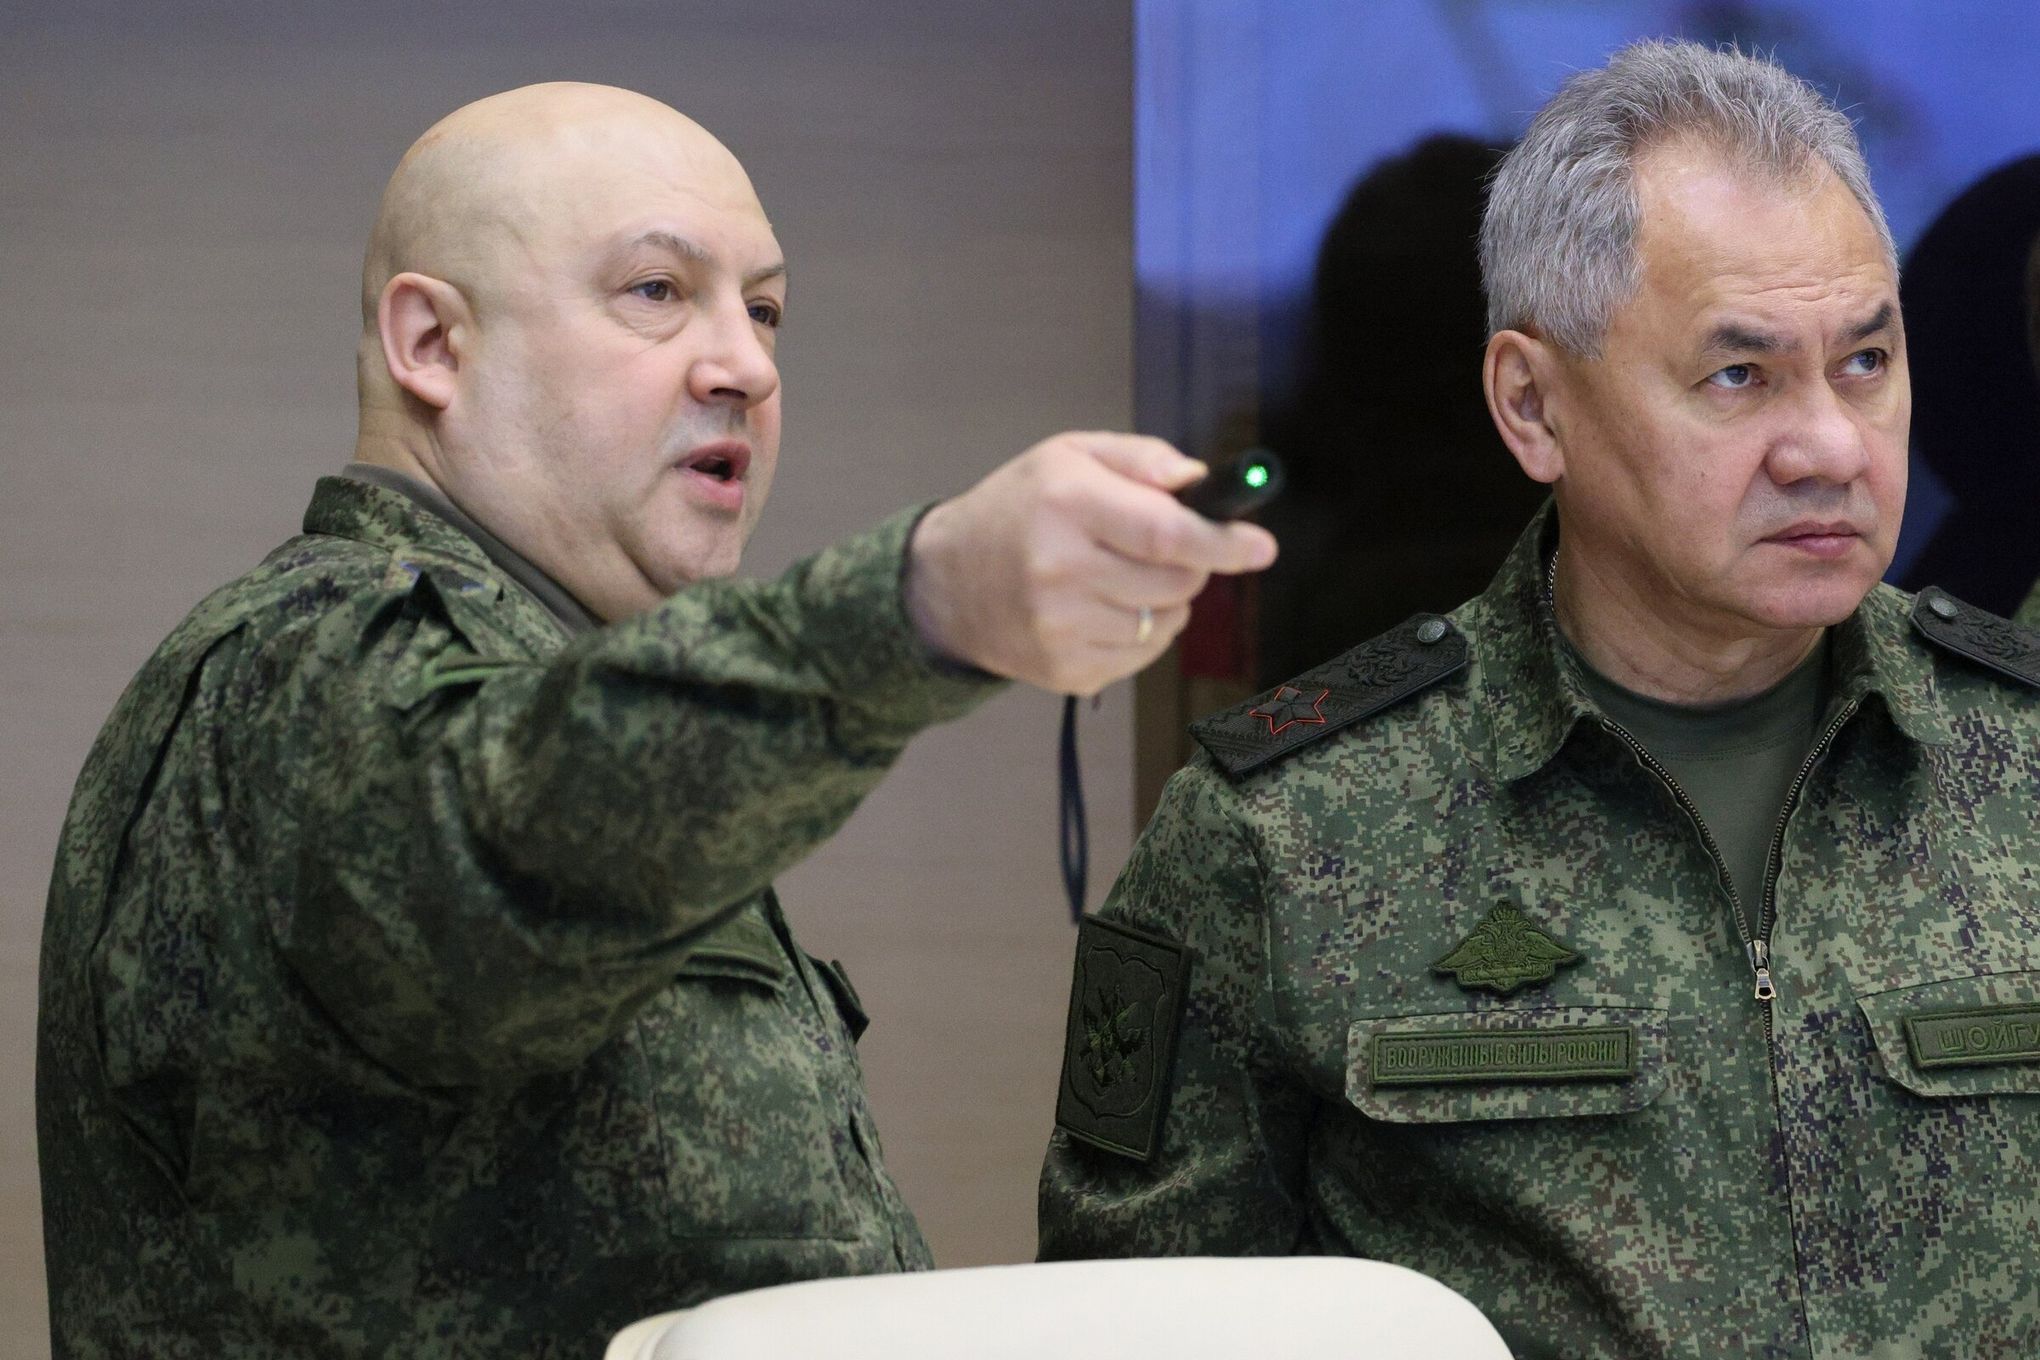 Russian general knew about mercenary chief's rebellion plans, U.S.